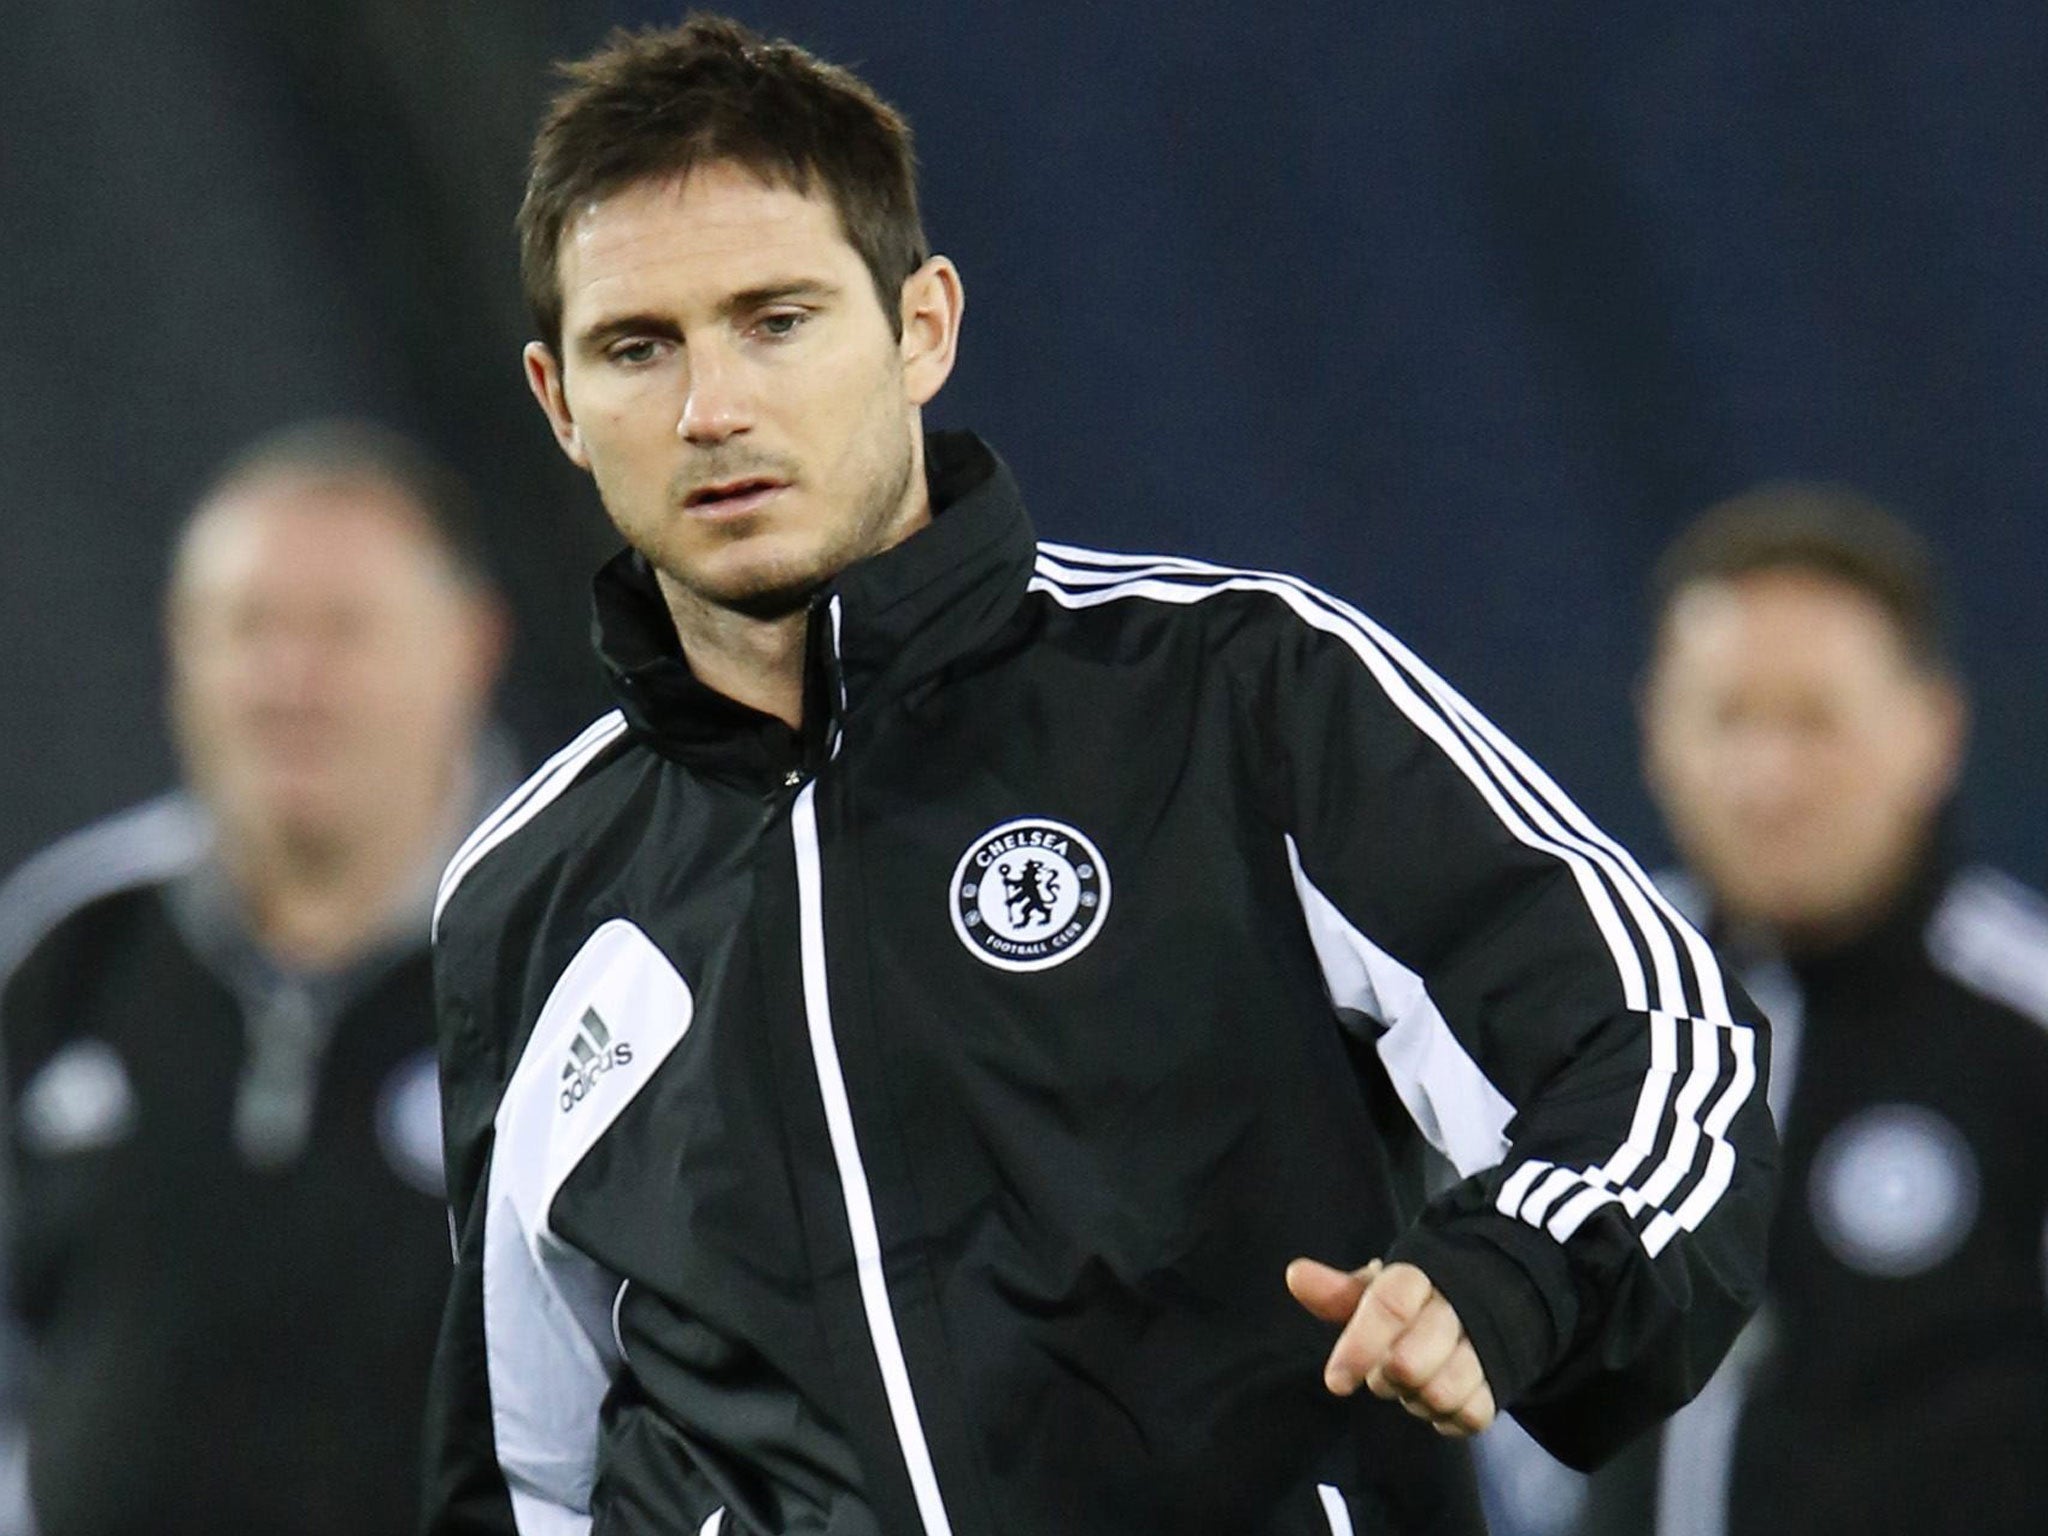 Frank Lampard: The England midfielder has only six months left on his deal at Chelsea